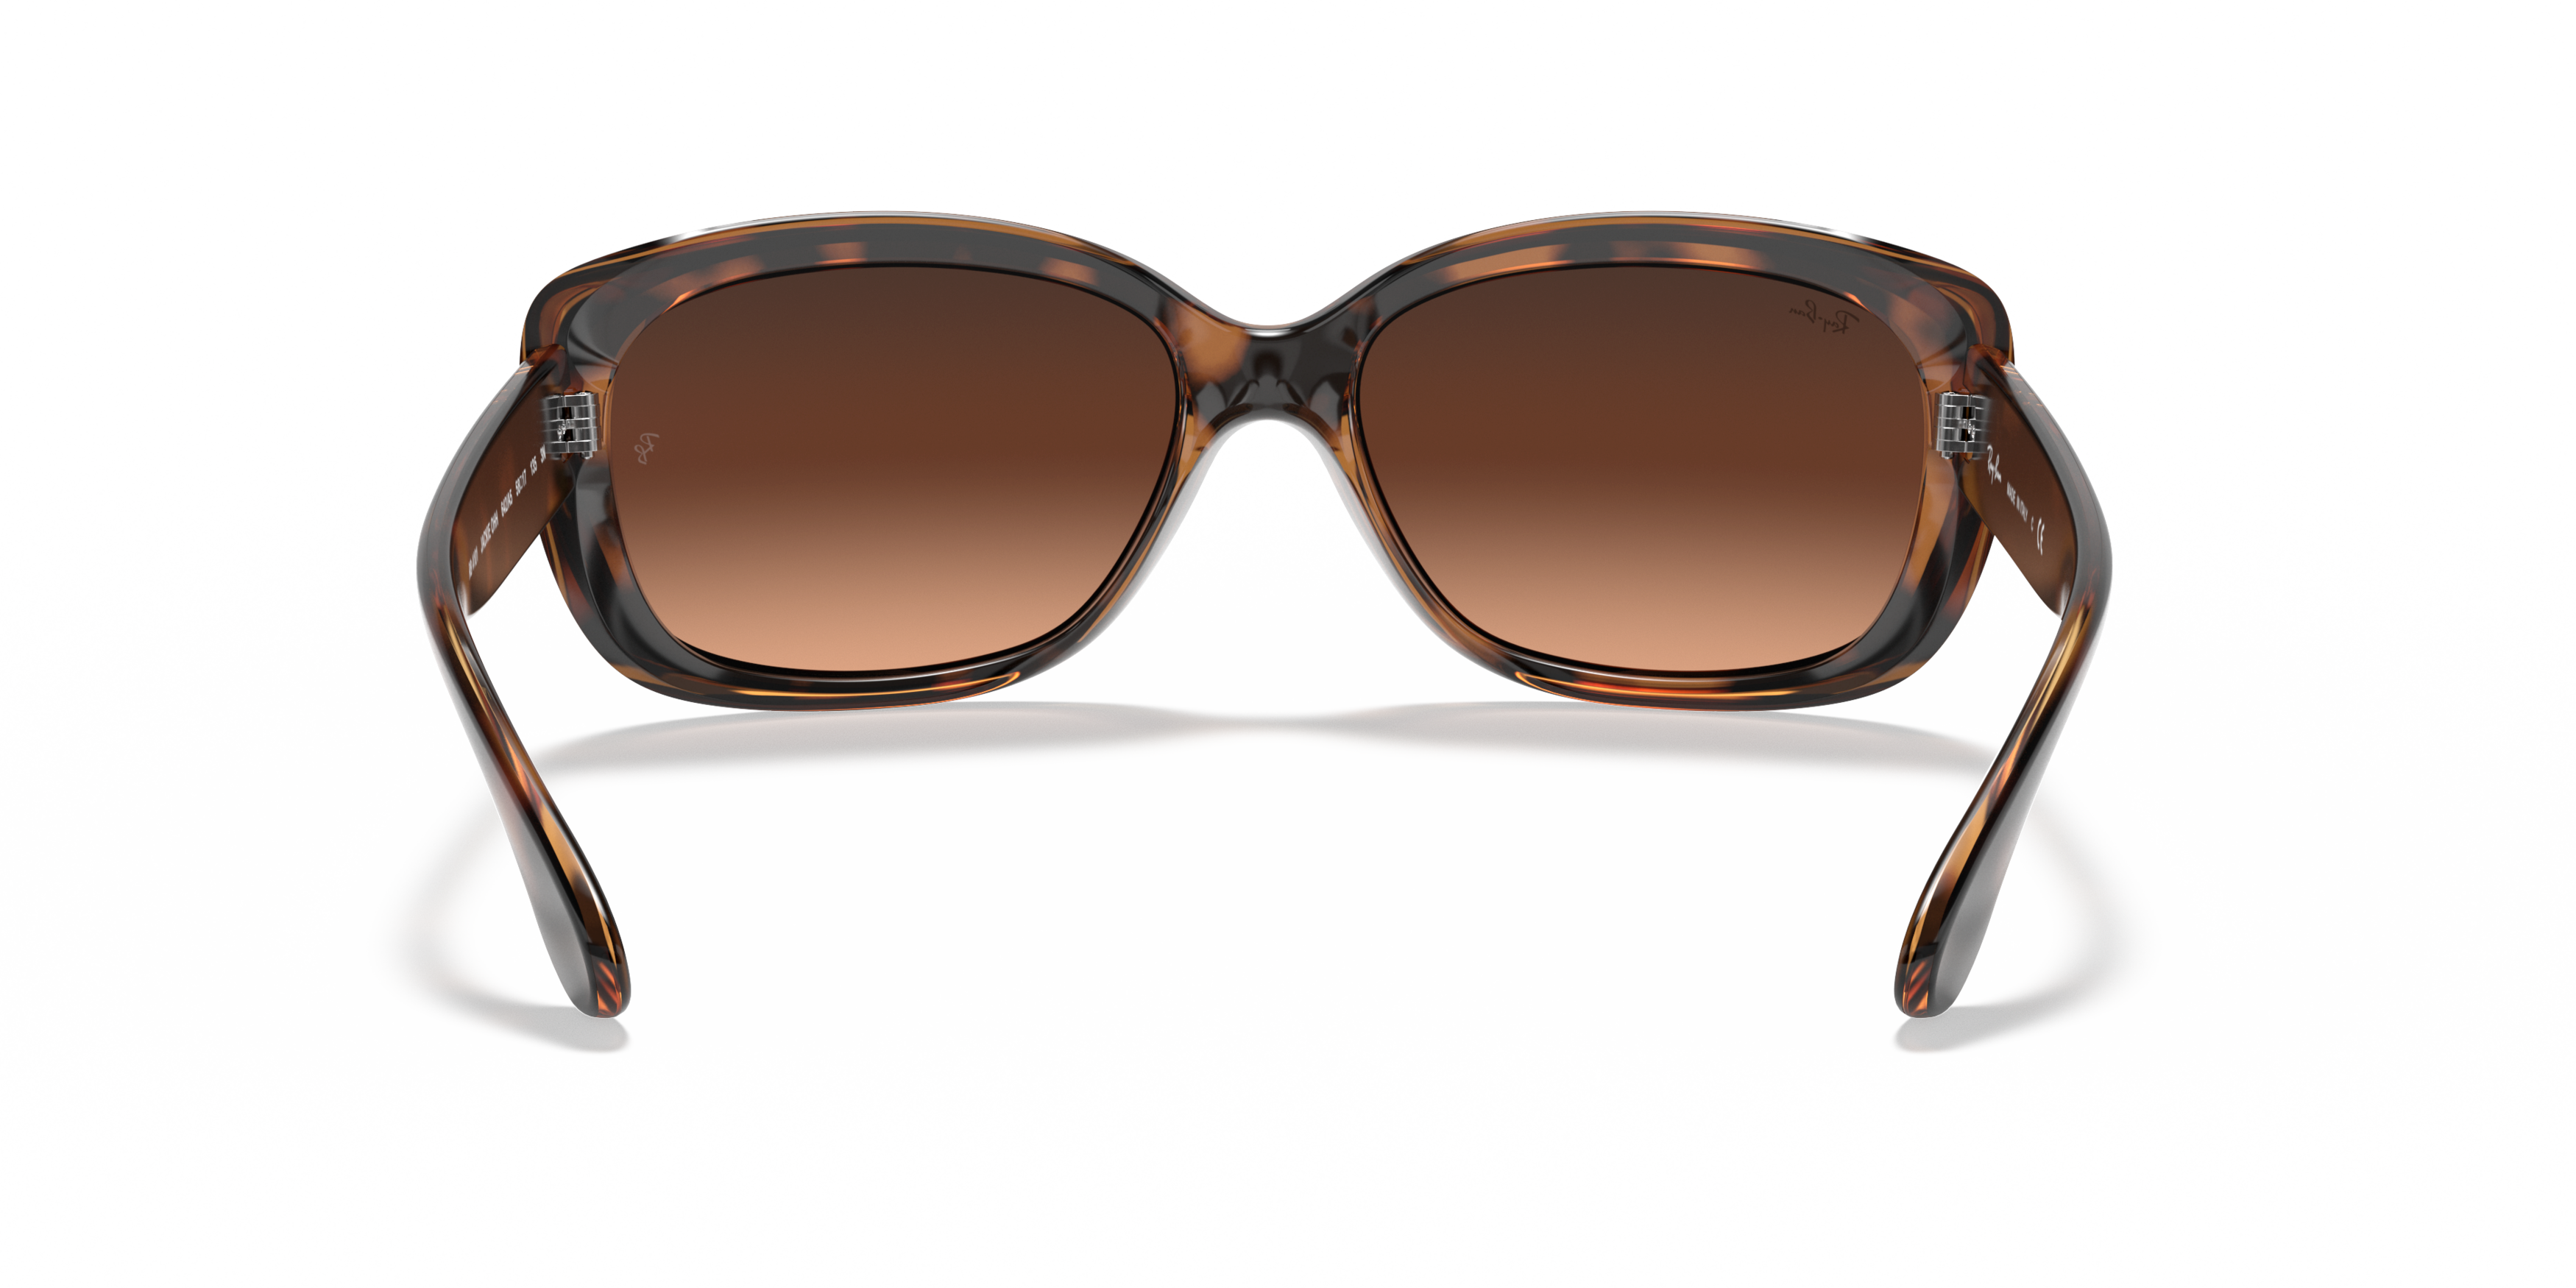 Detail02 Ray-Ban Jackie Ohh RB 4101 Sunglasses Brown / Tortoise Shell